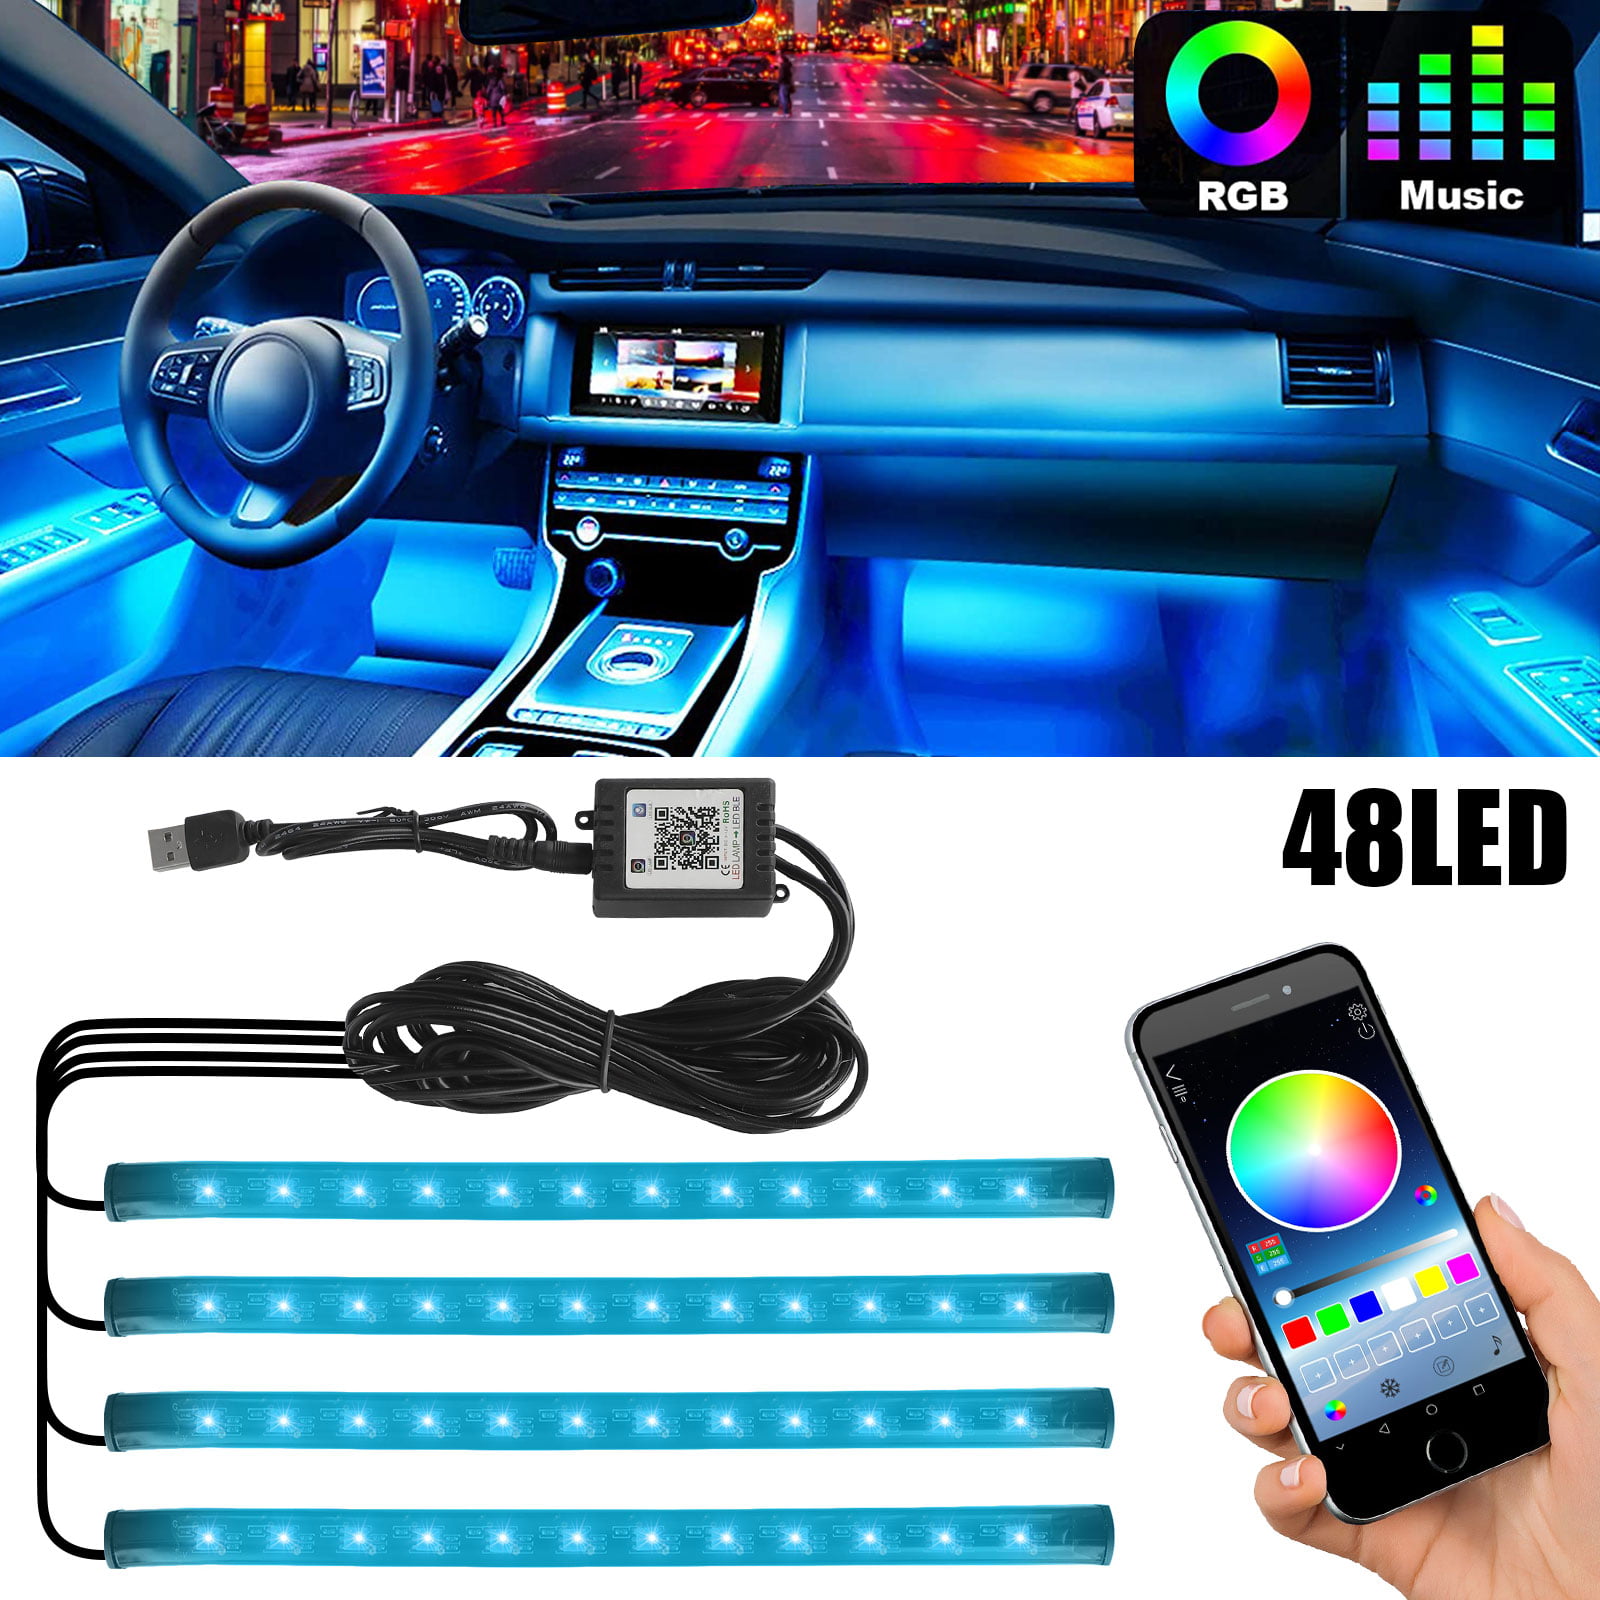 Car LED Interior Lighting Car LED Footwell Lighting Car Interior LED Strip Atmosphere Light with USB Port and Music Controllable RGB Ambient Lighting Car with App